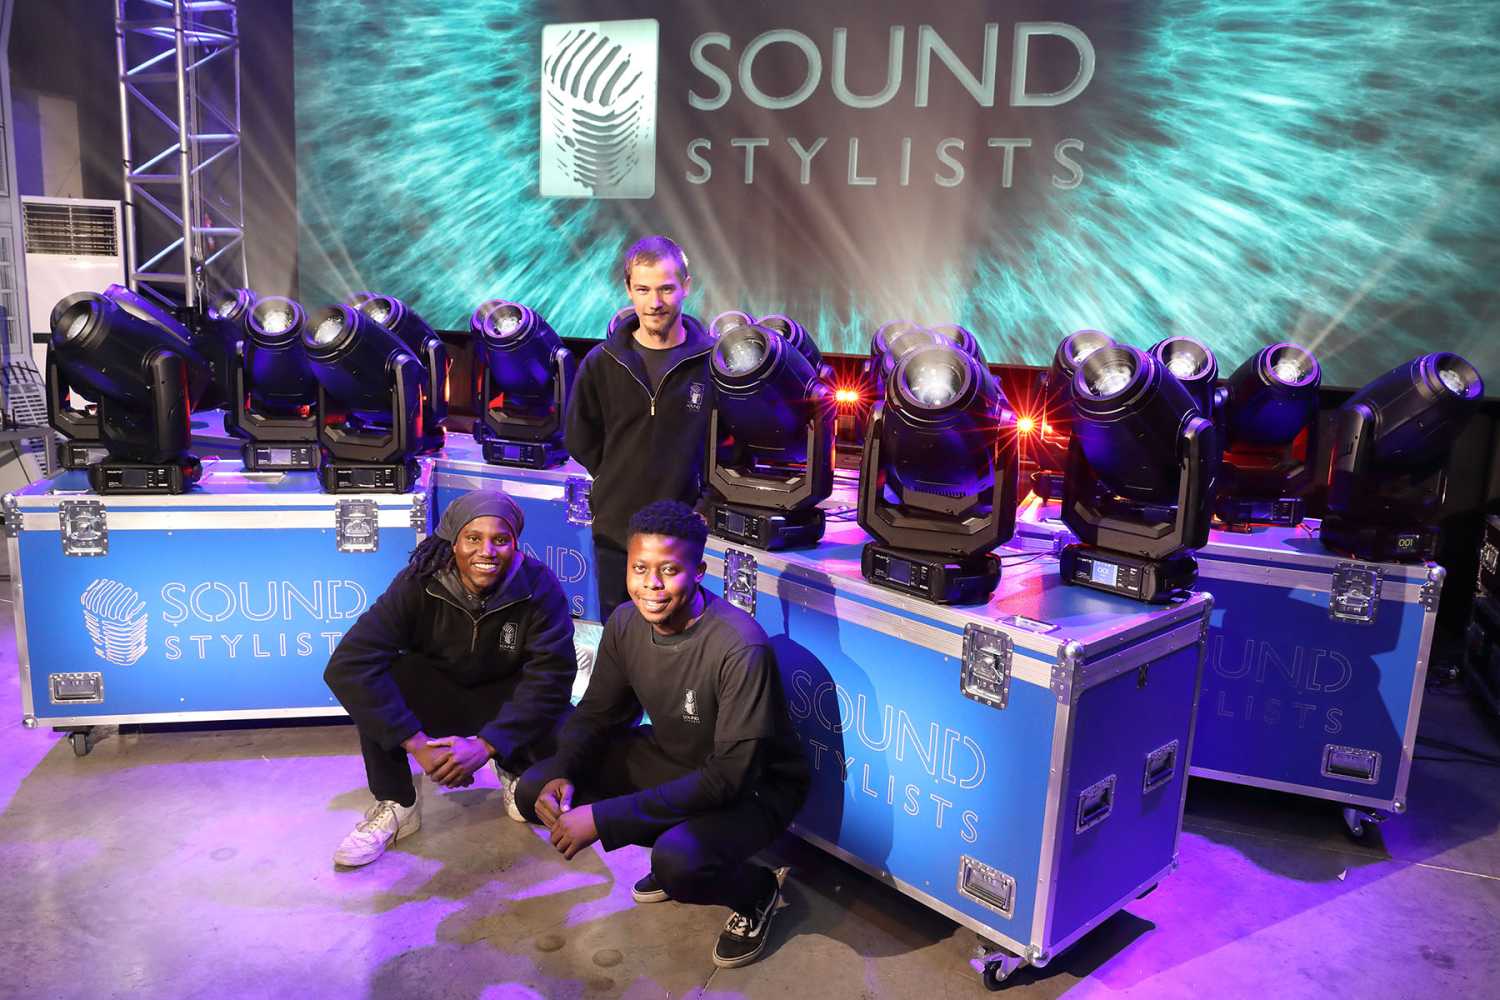 The new moving lights join around 300 other Robe luminaires in the Sound Stylists inventory (photo: DWR)